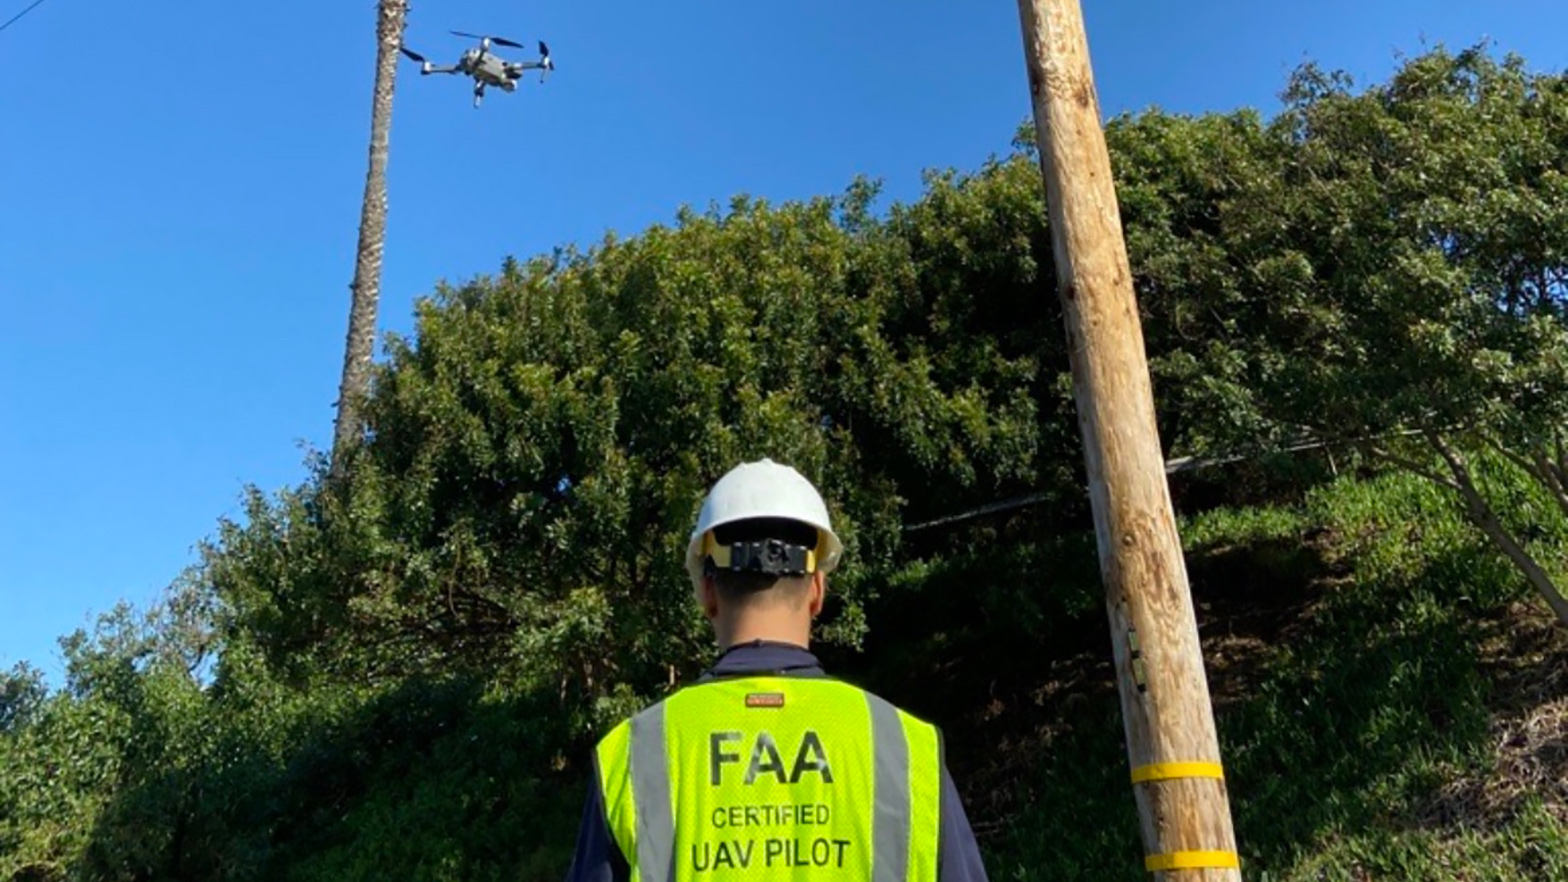 Drone technology takes safety to new heights in El Segundo